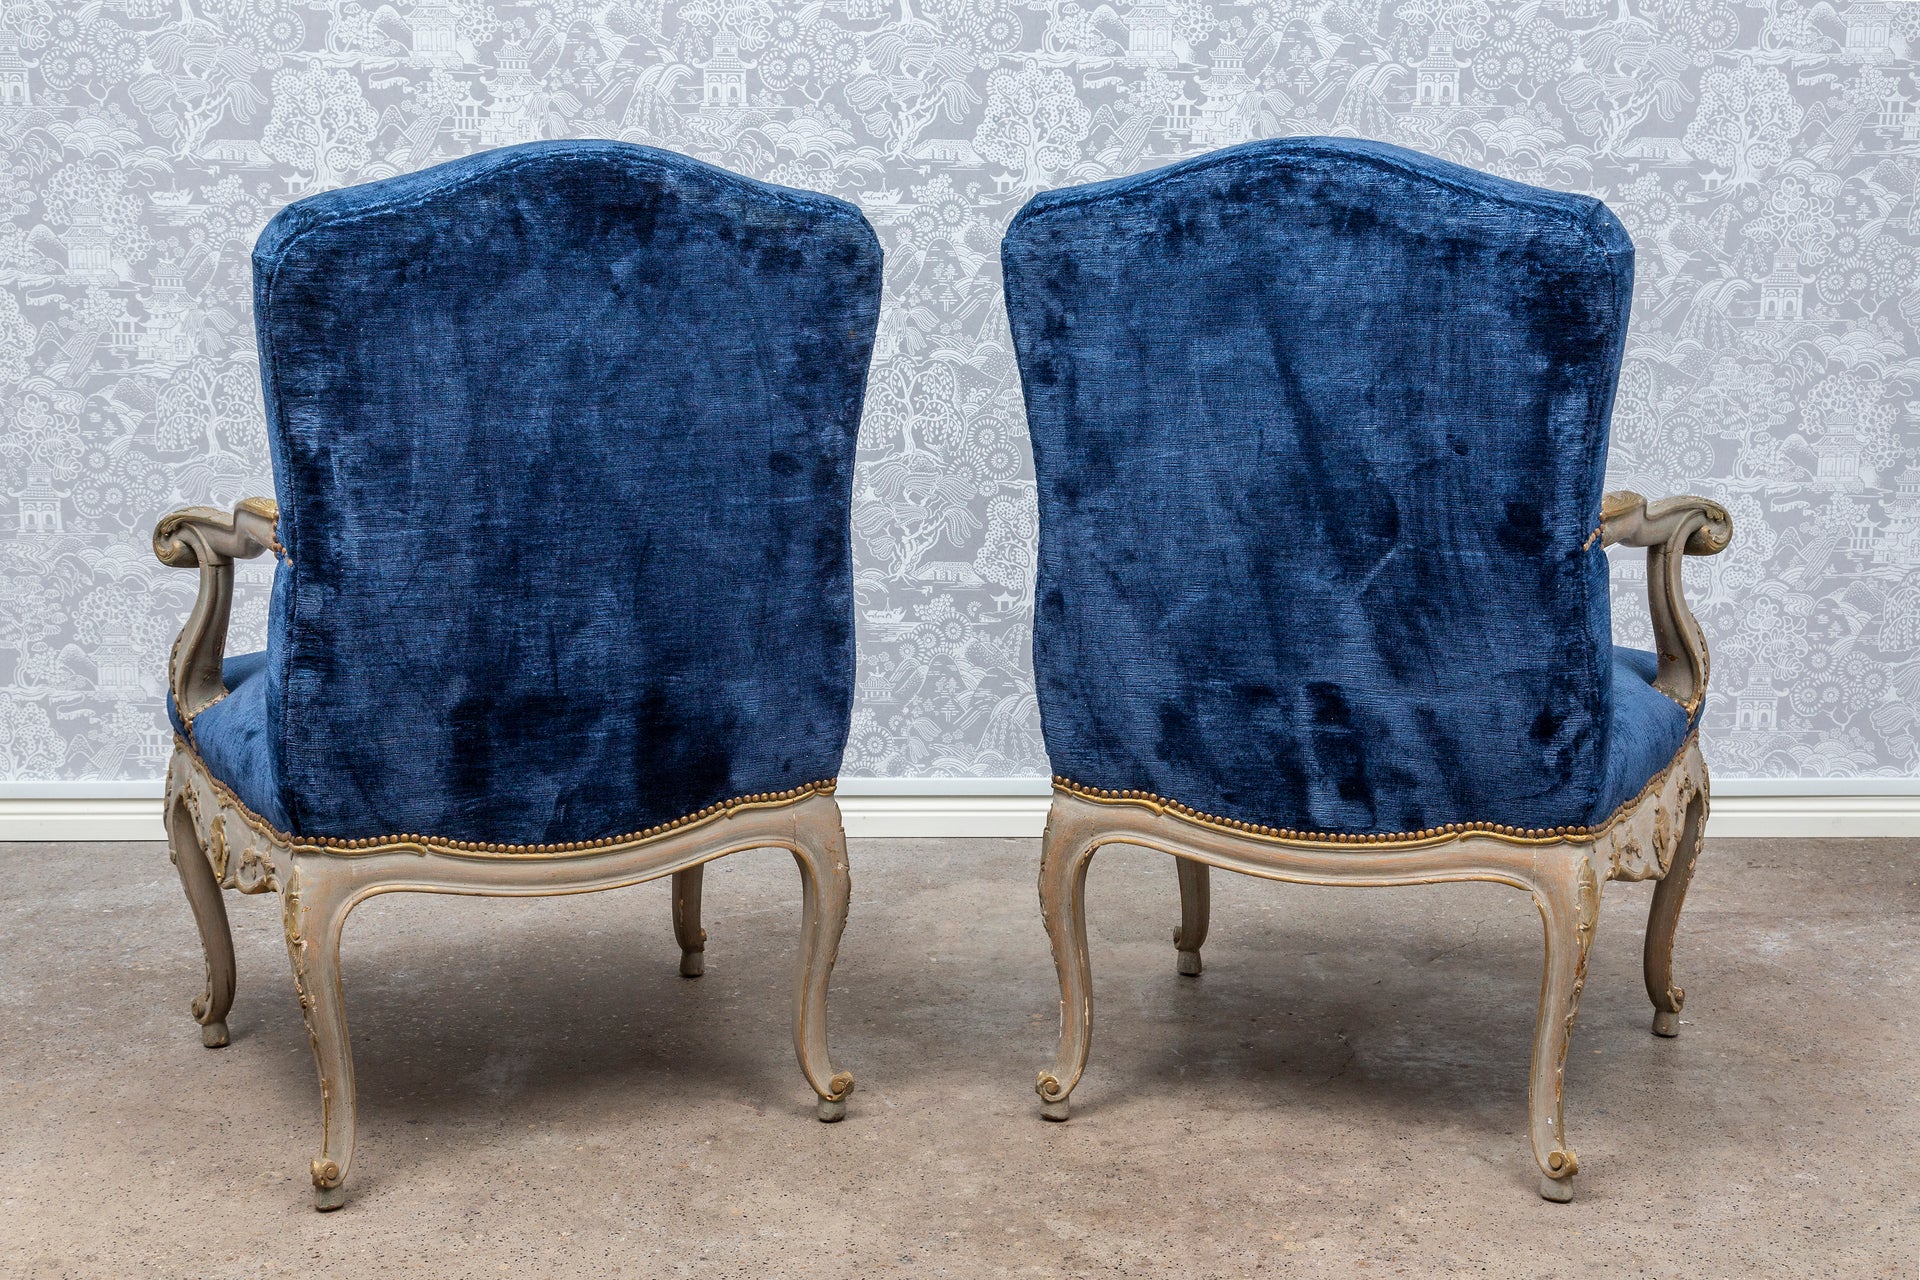 SOLD A pair of handsome carved and giltwood painted armchairs in the Louis XV manner, French circa 1920